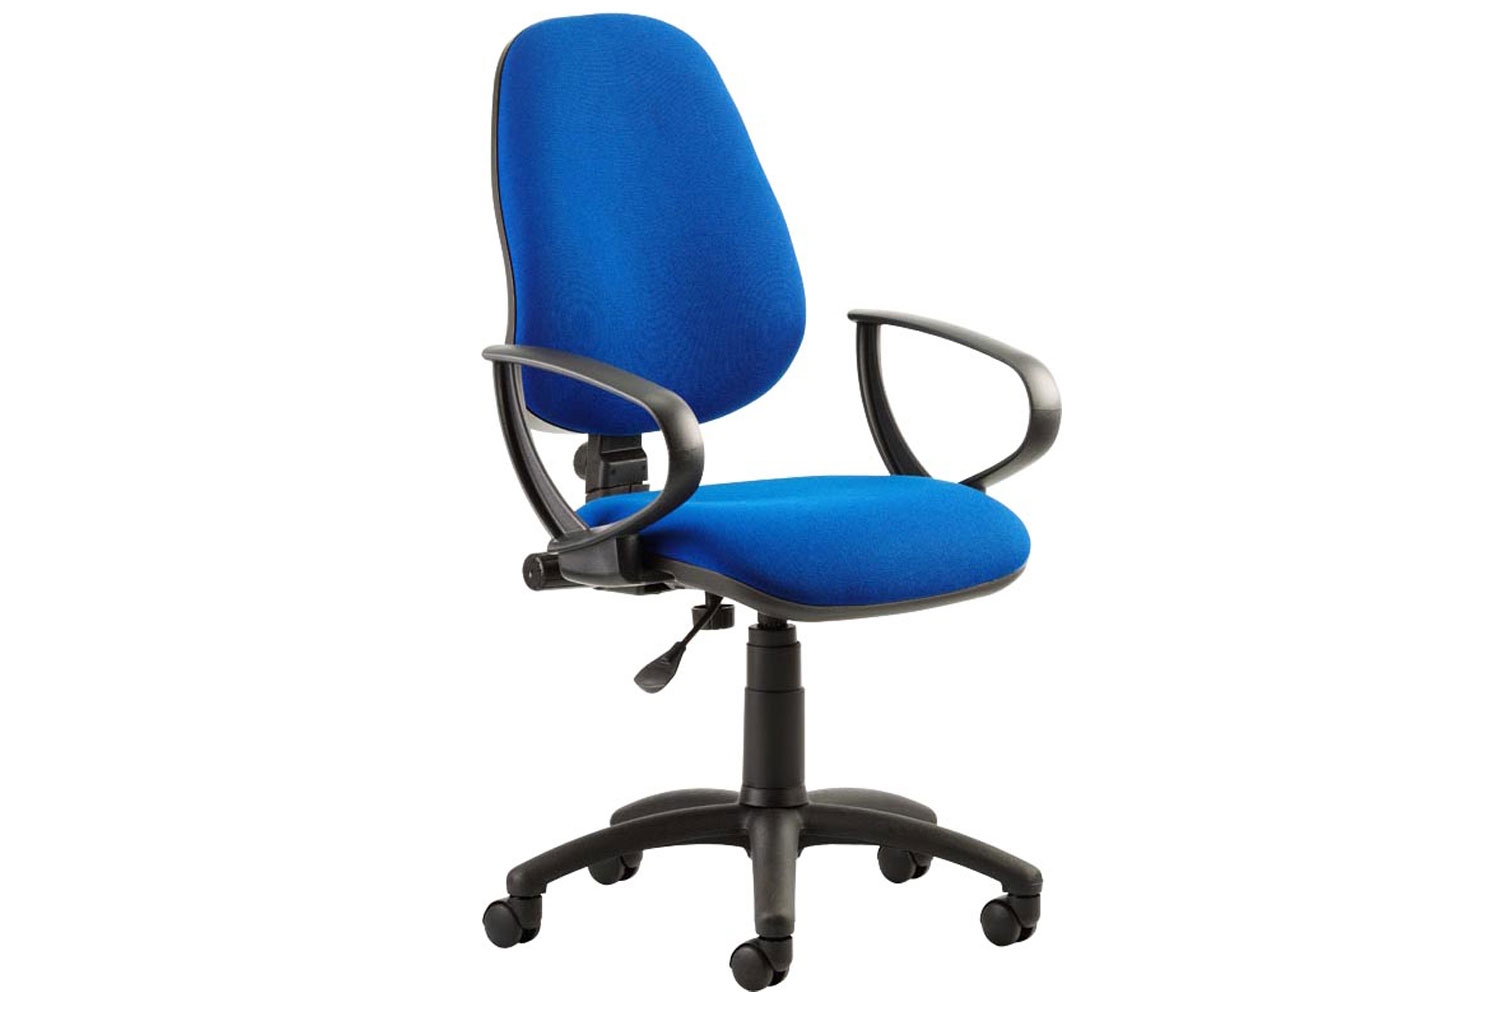 Lunar 1 Lever Operator Office Chair With Fixed Arms, Blue